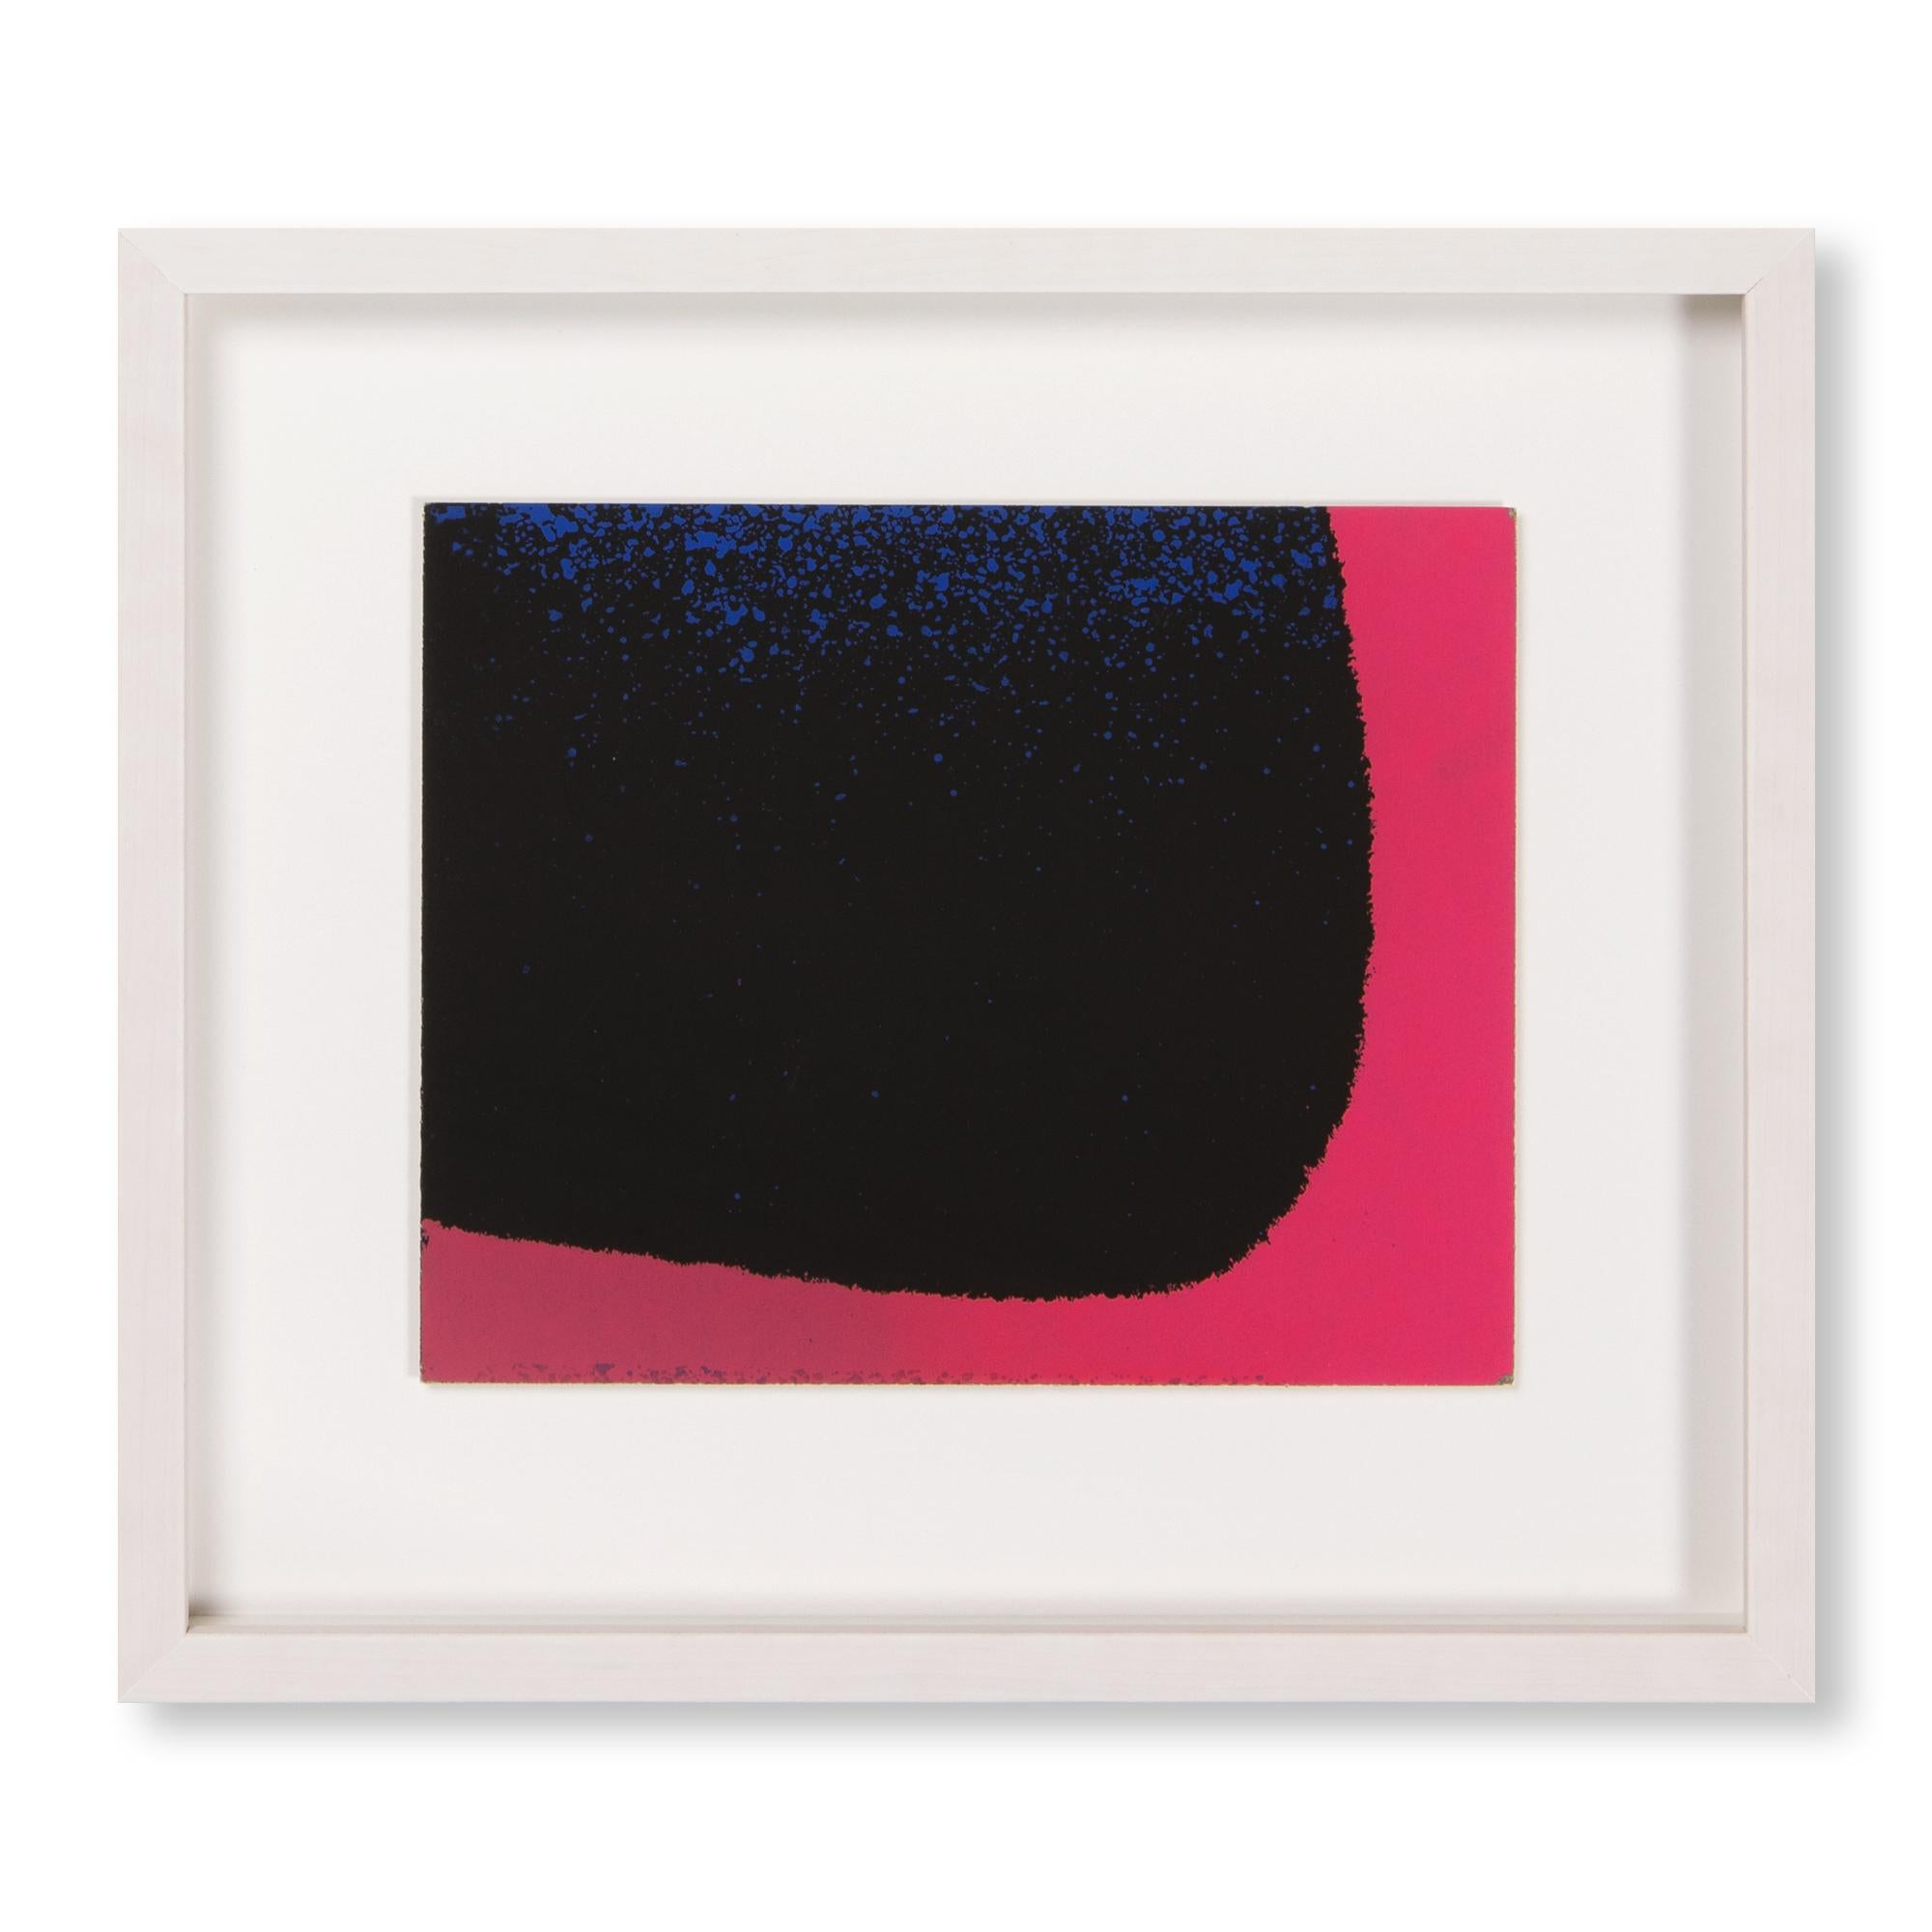 Rupprecht Geiger (German, 1908 – 2009)
Blue-Black and Bluish Red, 1961
Medium: Screenprint on cardboard
Dimensions: 16.7 x 20.6 cm
Framed dimensions: 31.4 x 27.5 x 2.9 cm
Edition of 50: Hand-signed and numbered
Catalogue raisonné: WVG 41
Condition: